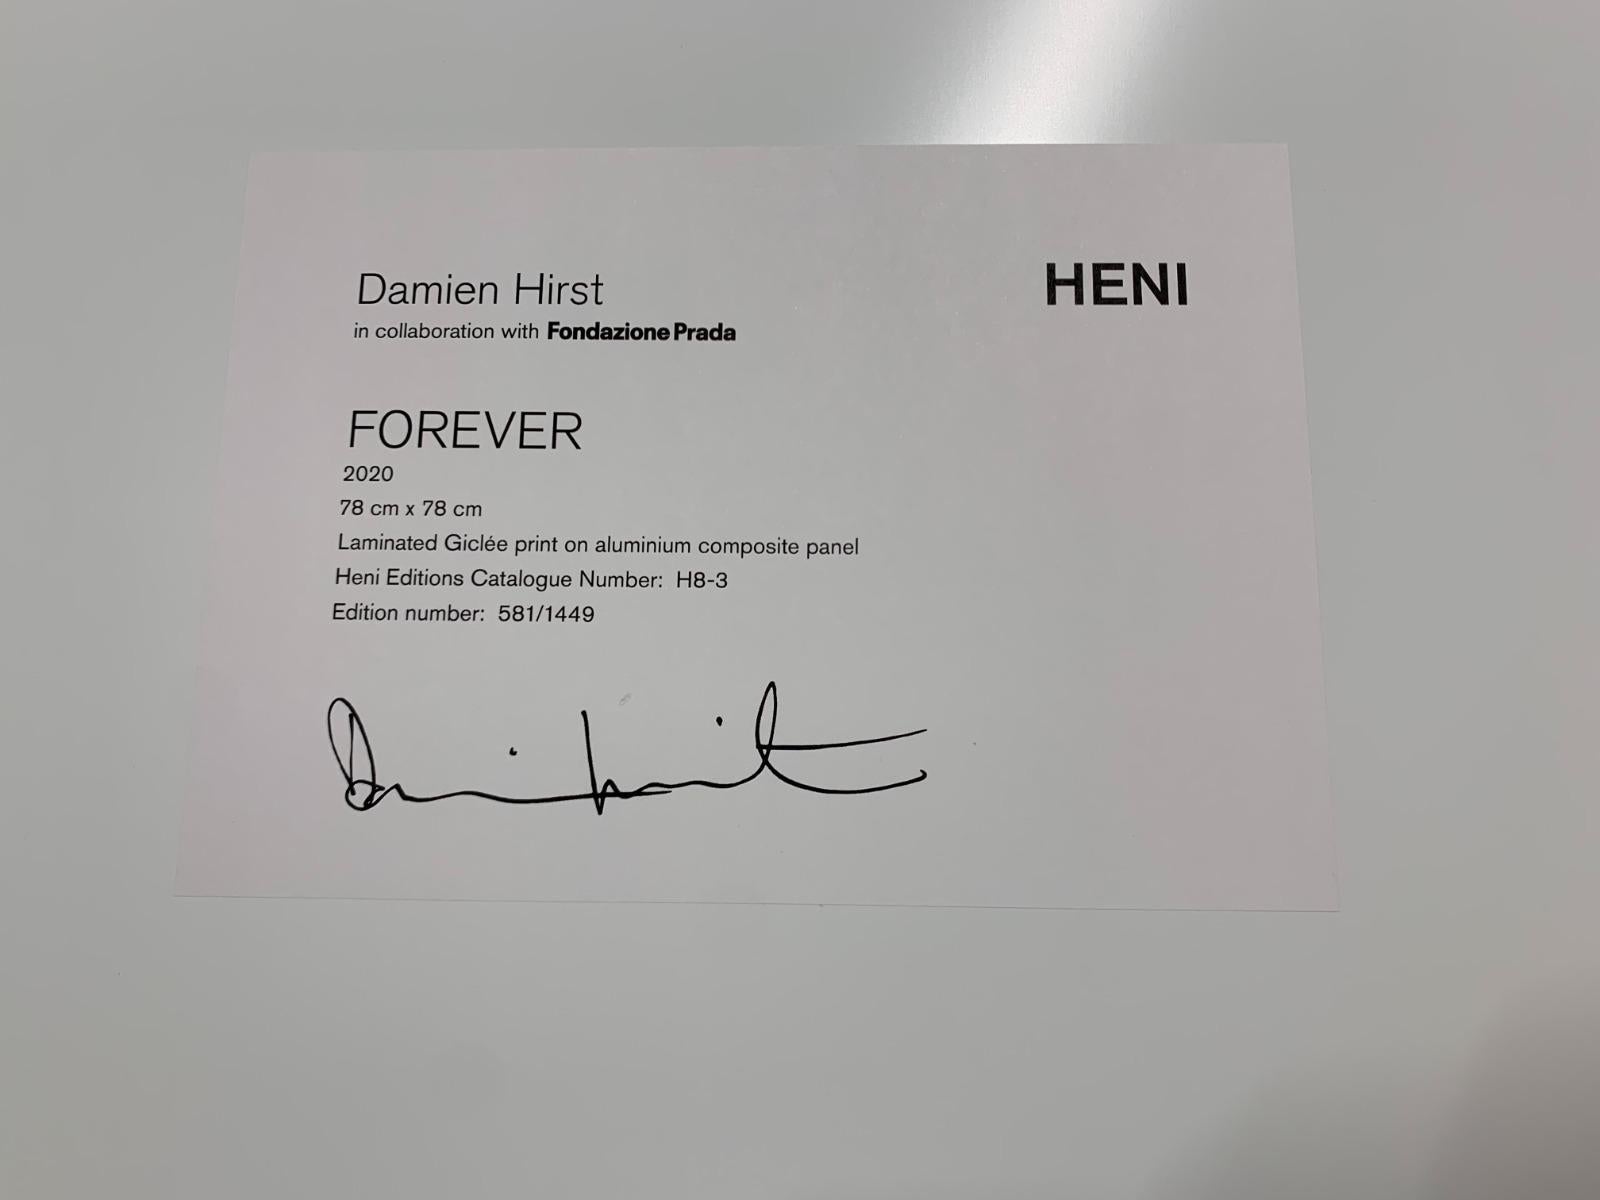 Forever (large) - Damien Hirst, Contemporary Art, 21st Century, YBAs, Colorful, Giclée Print, Brush Stokes, Paint, Glossy, Limited Edition

Laminated Giclée print on aluminium composite panel
Edition 581 of 1449
Signed and numbered on label on the